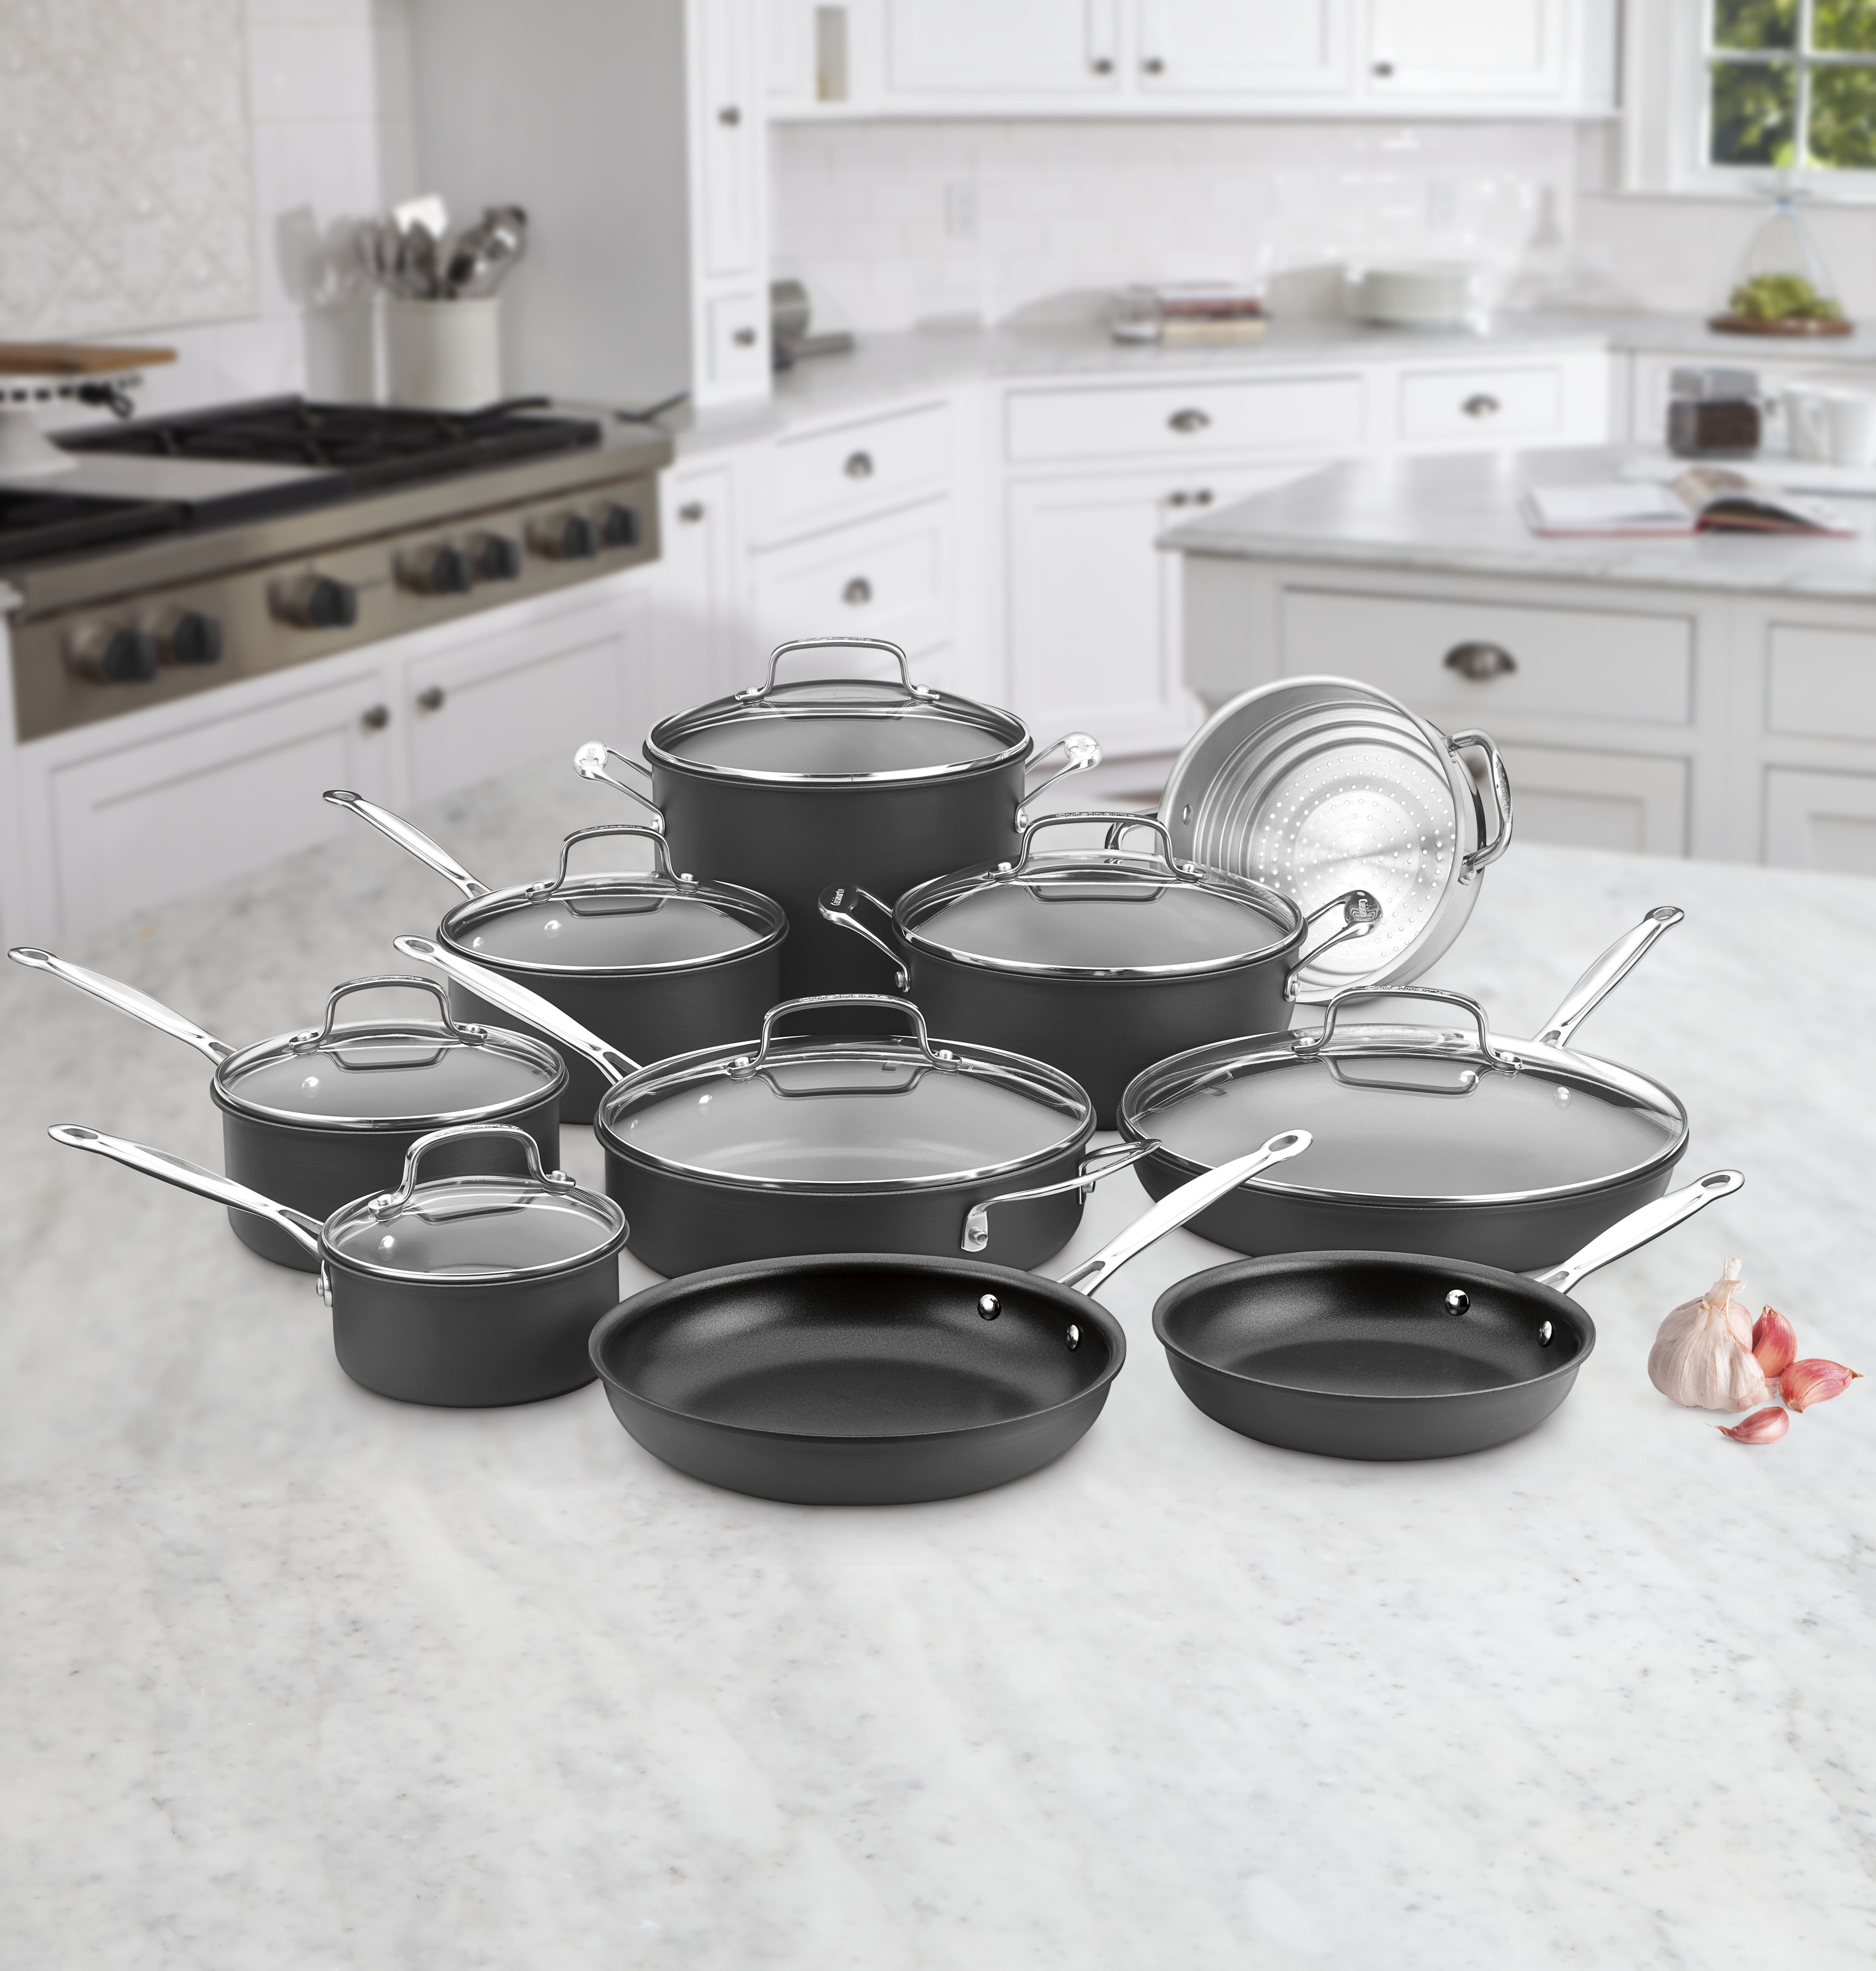 Cuisinart 13-Piece Chef's Classic Stainless Steel Cookware Set